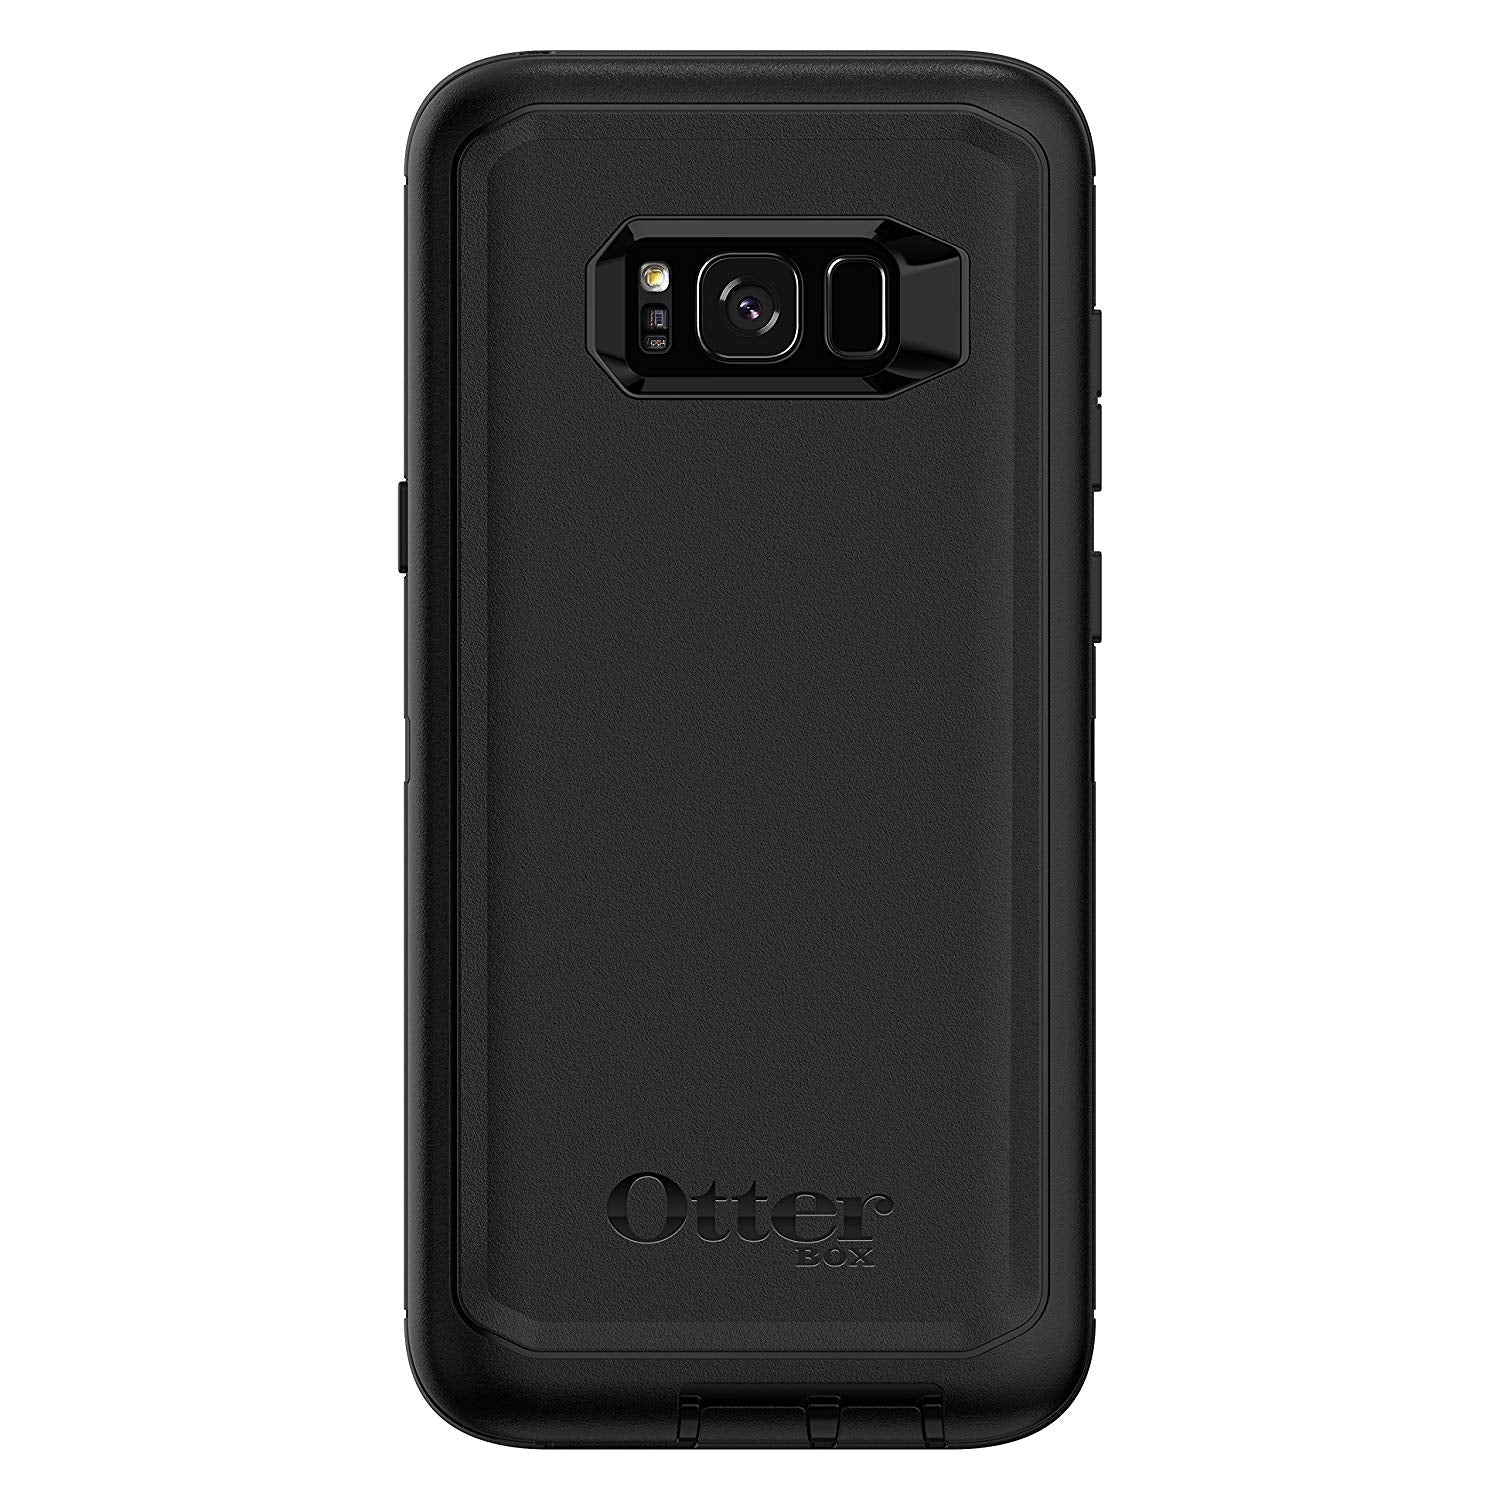 OtterBox DEFENDER SERIES Case for Samsung Galaxy S8+ - Black (Certified Refurbished)